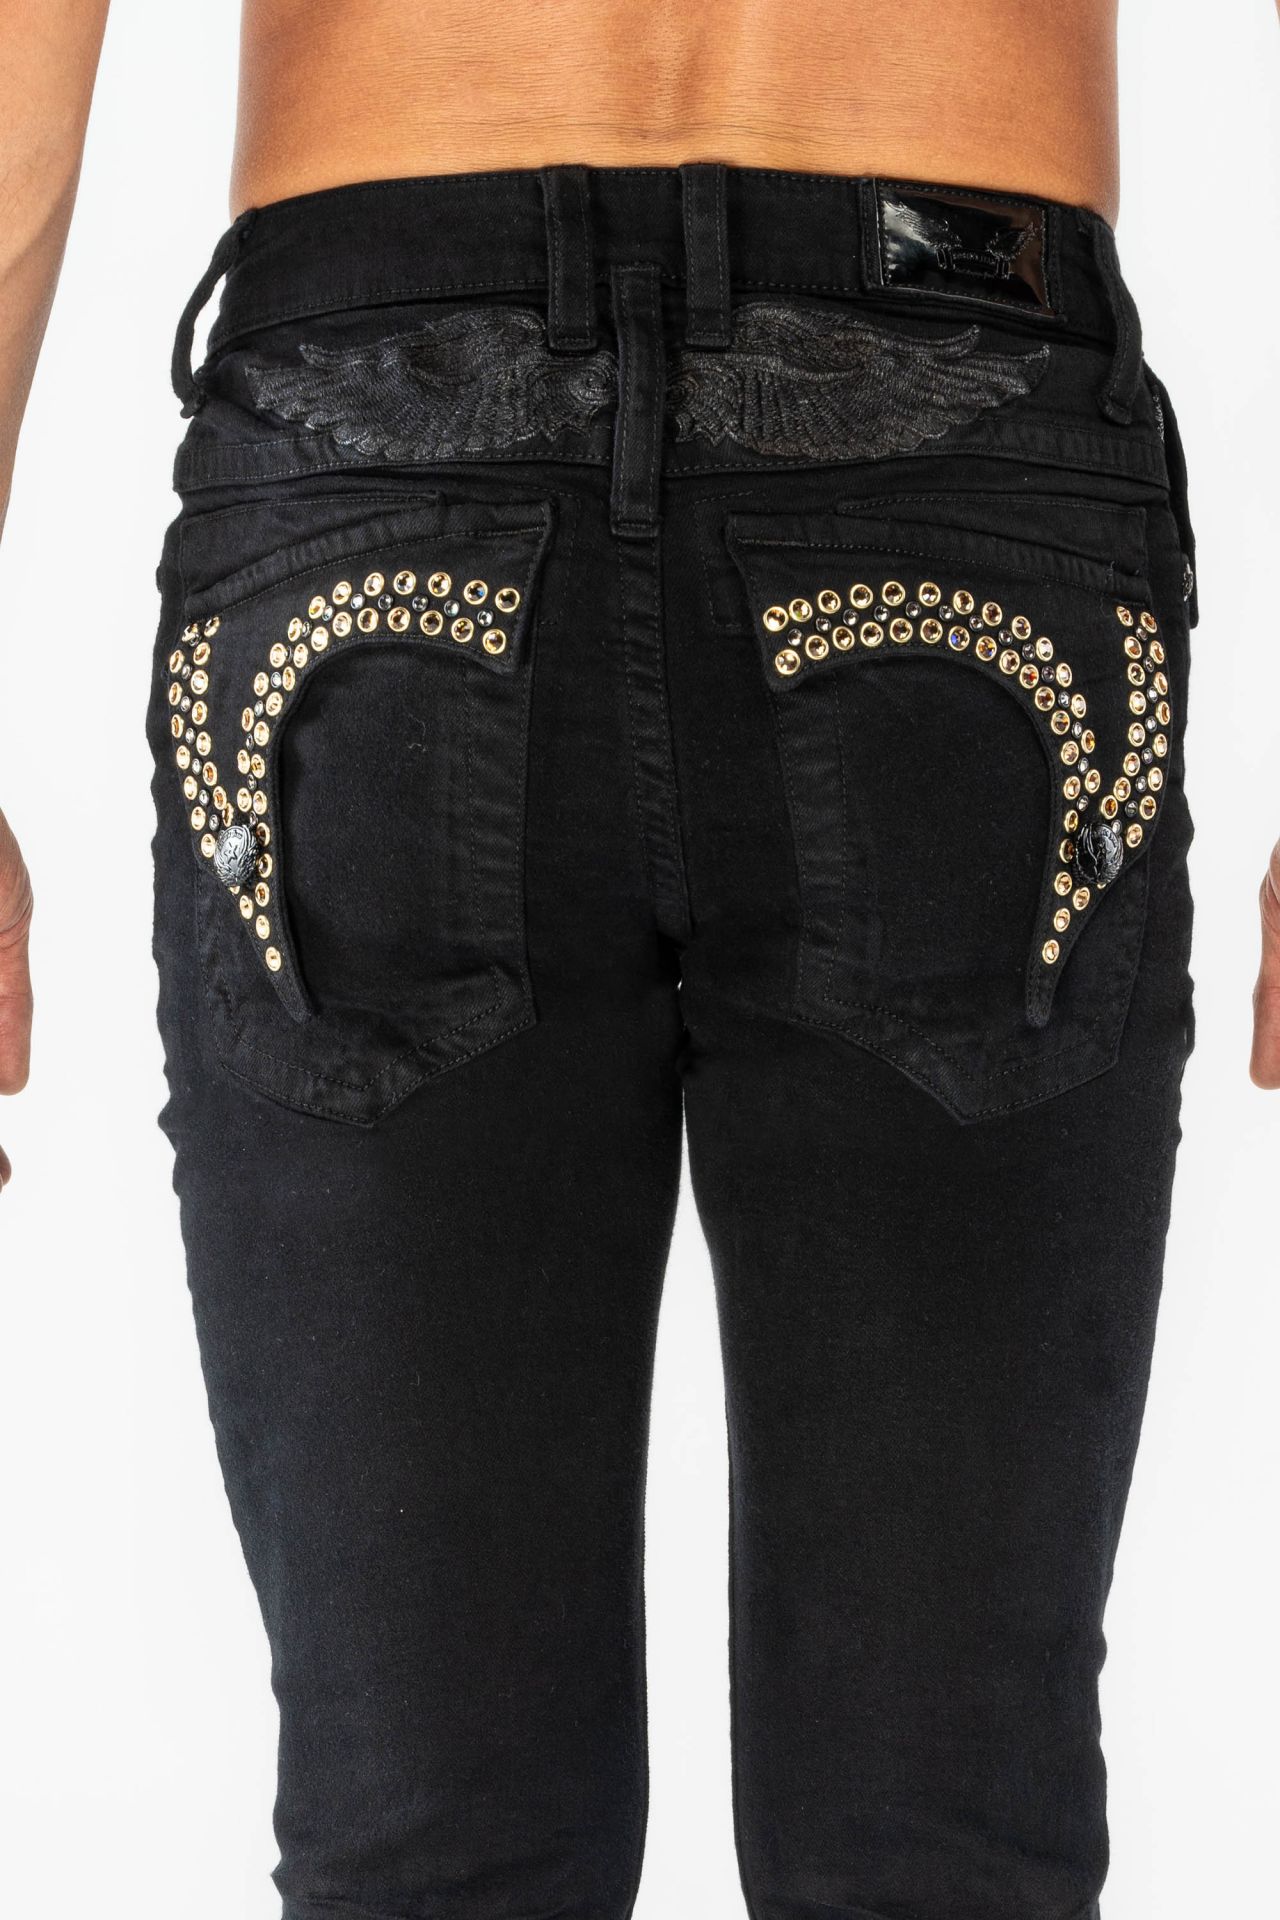 Jeans Black Crystals Skinny with